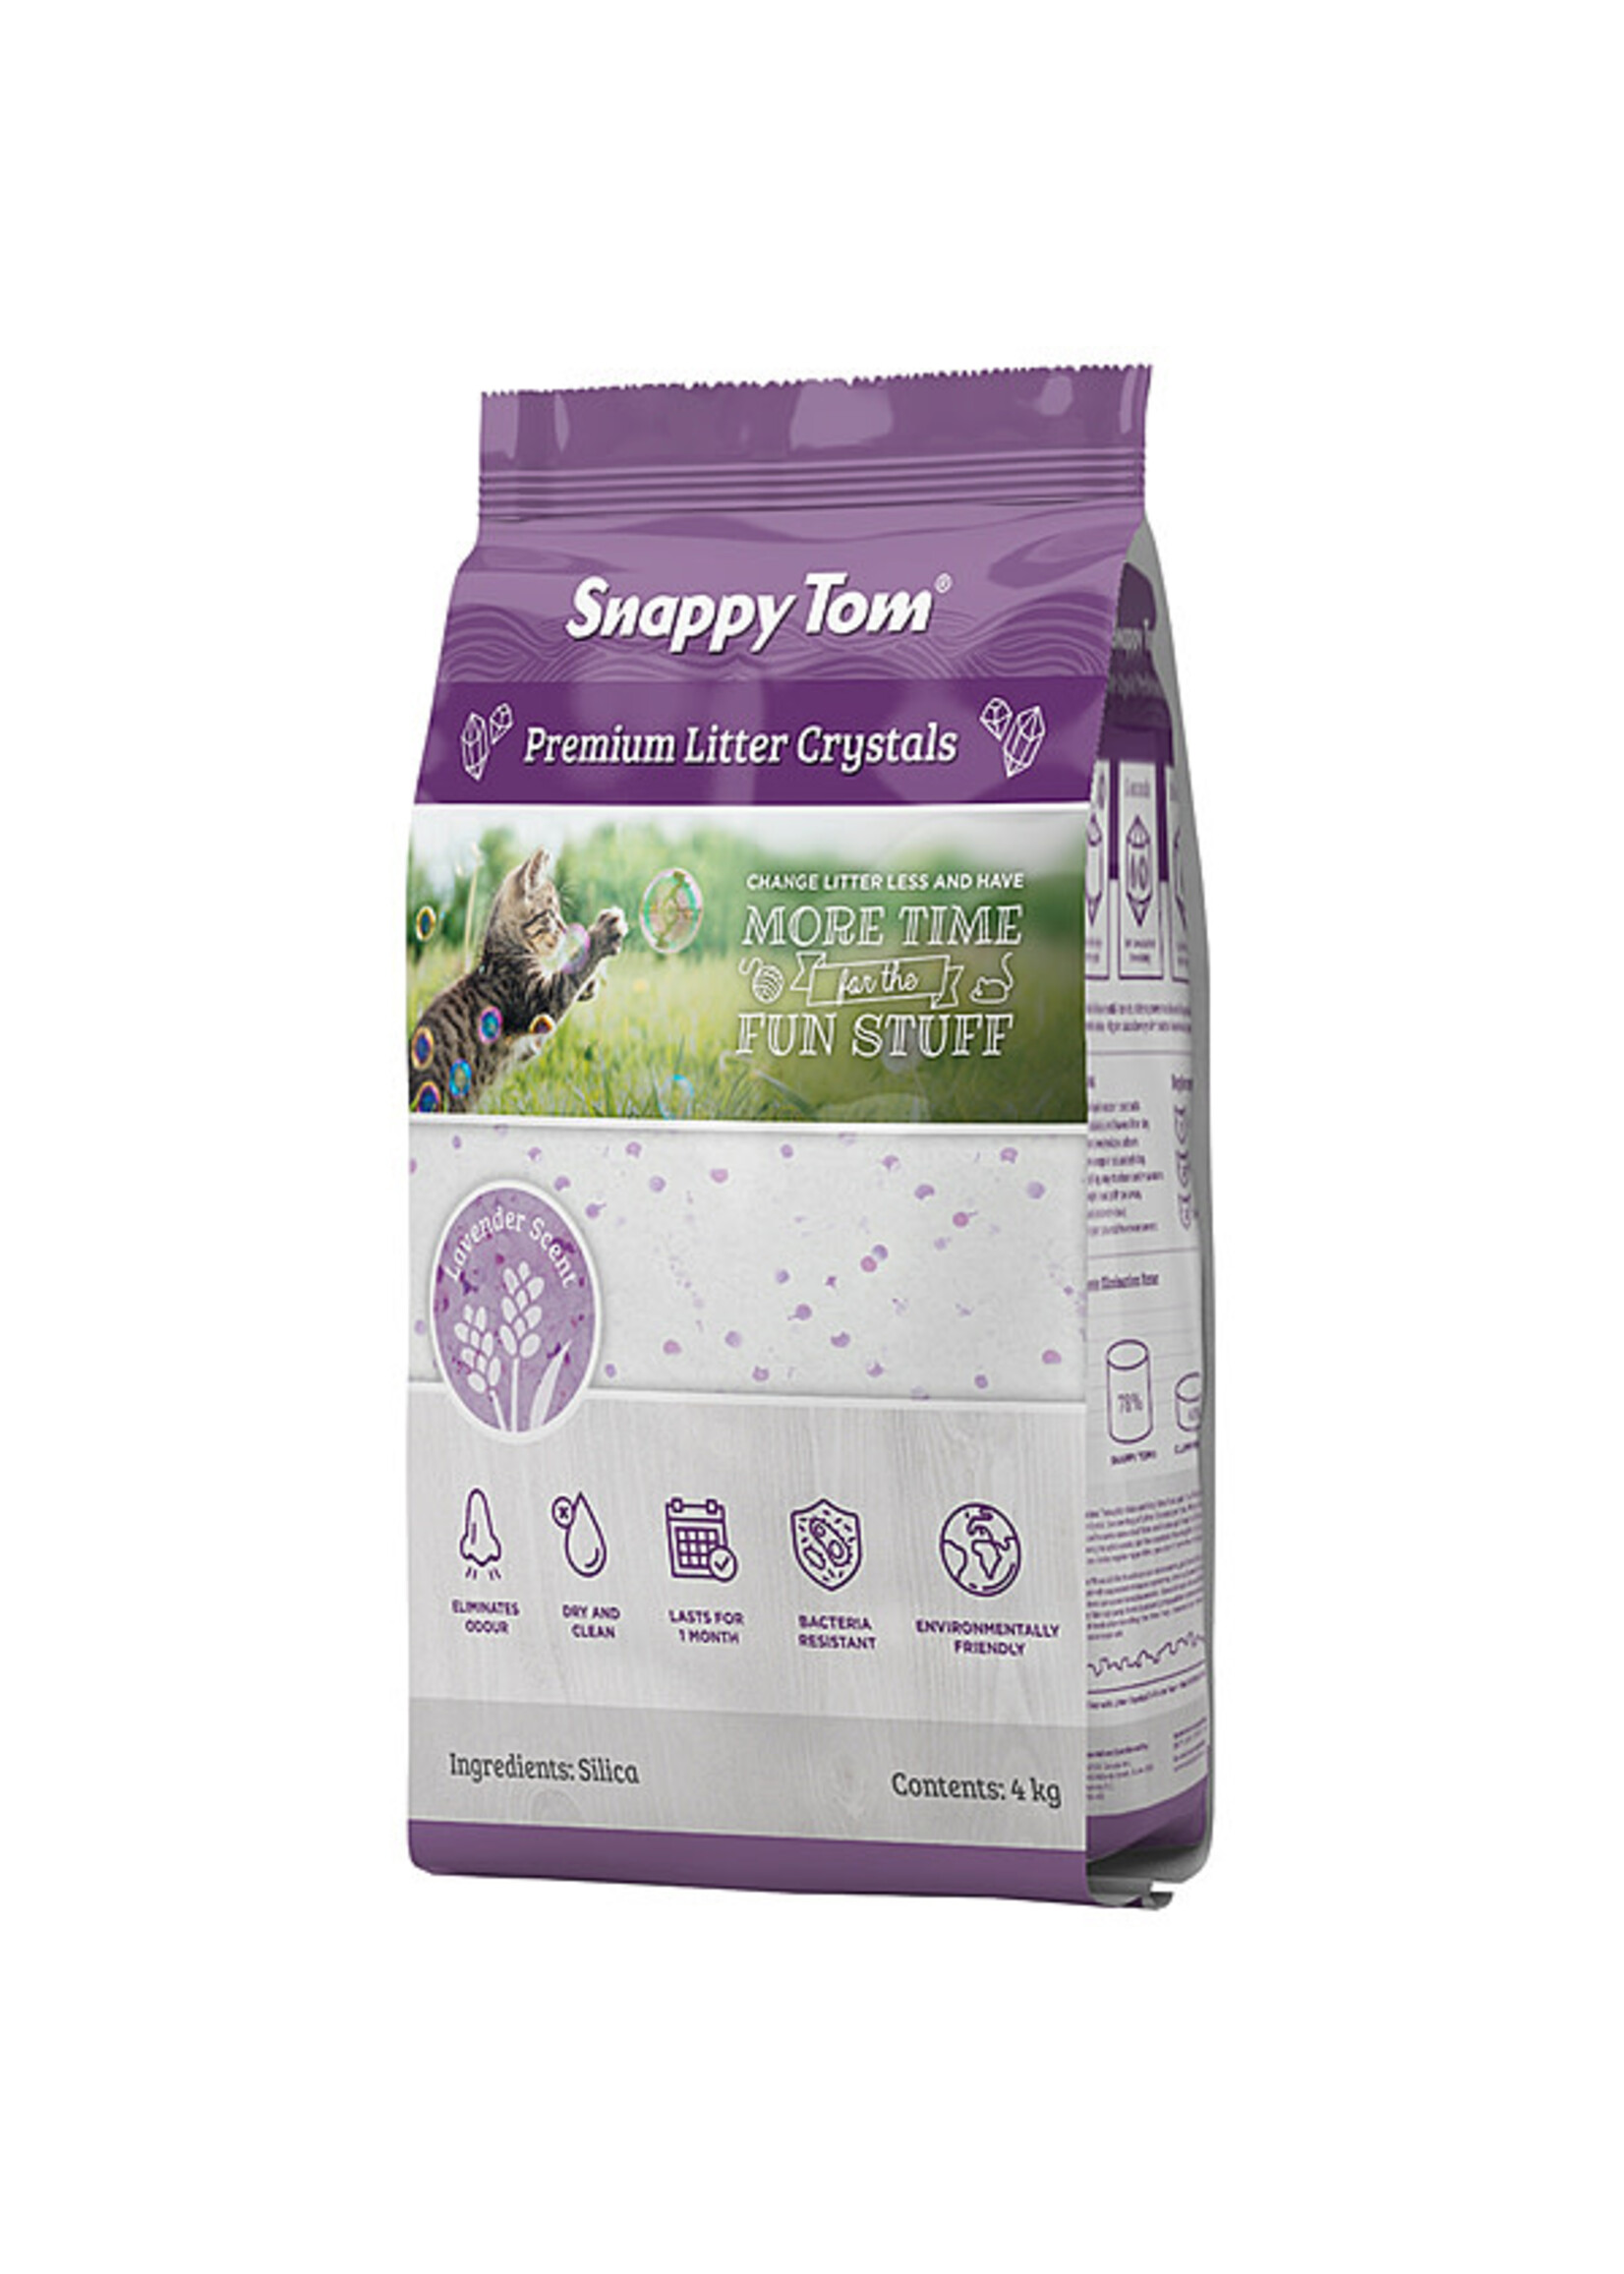 Snappy Tom Snappy Tom - Crystal Lavender Scent 8.8lb